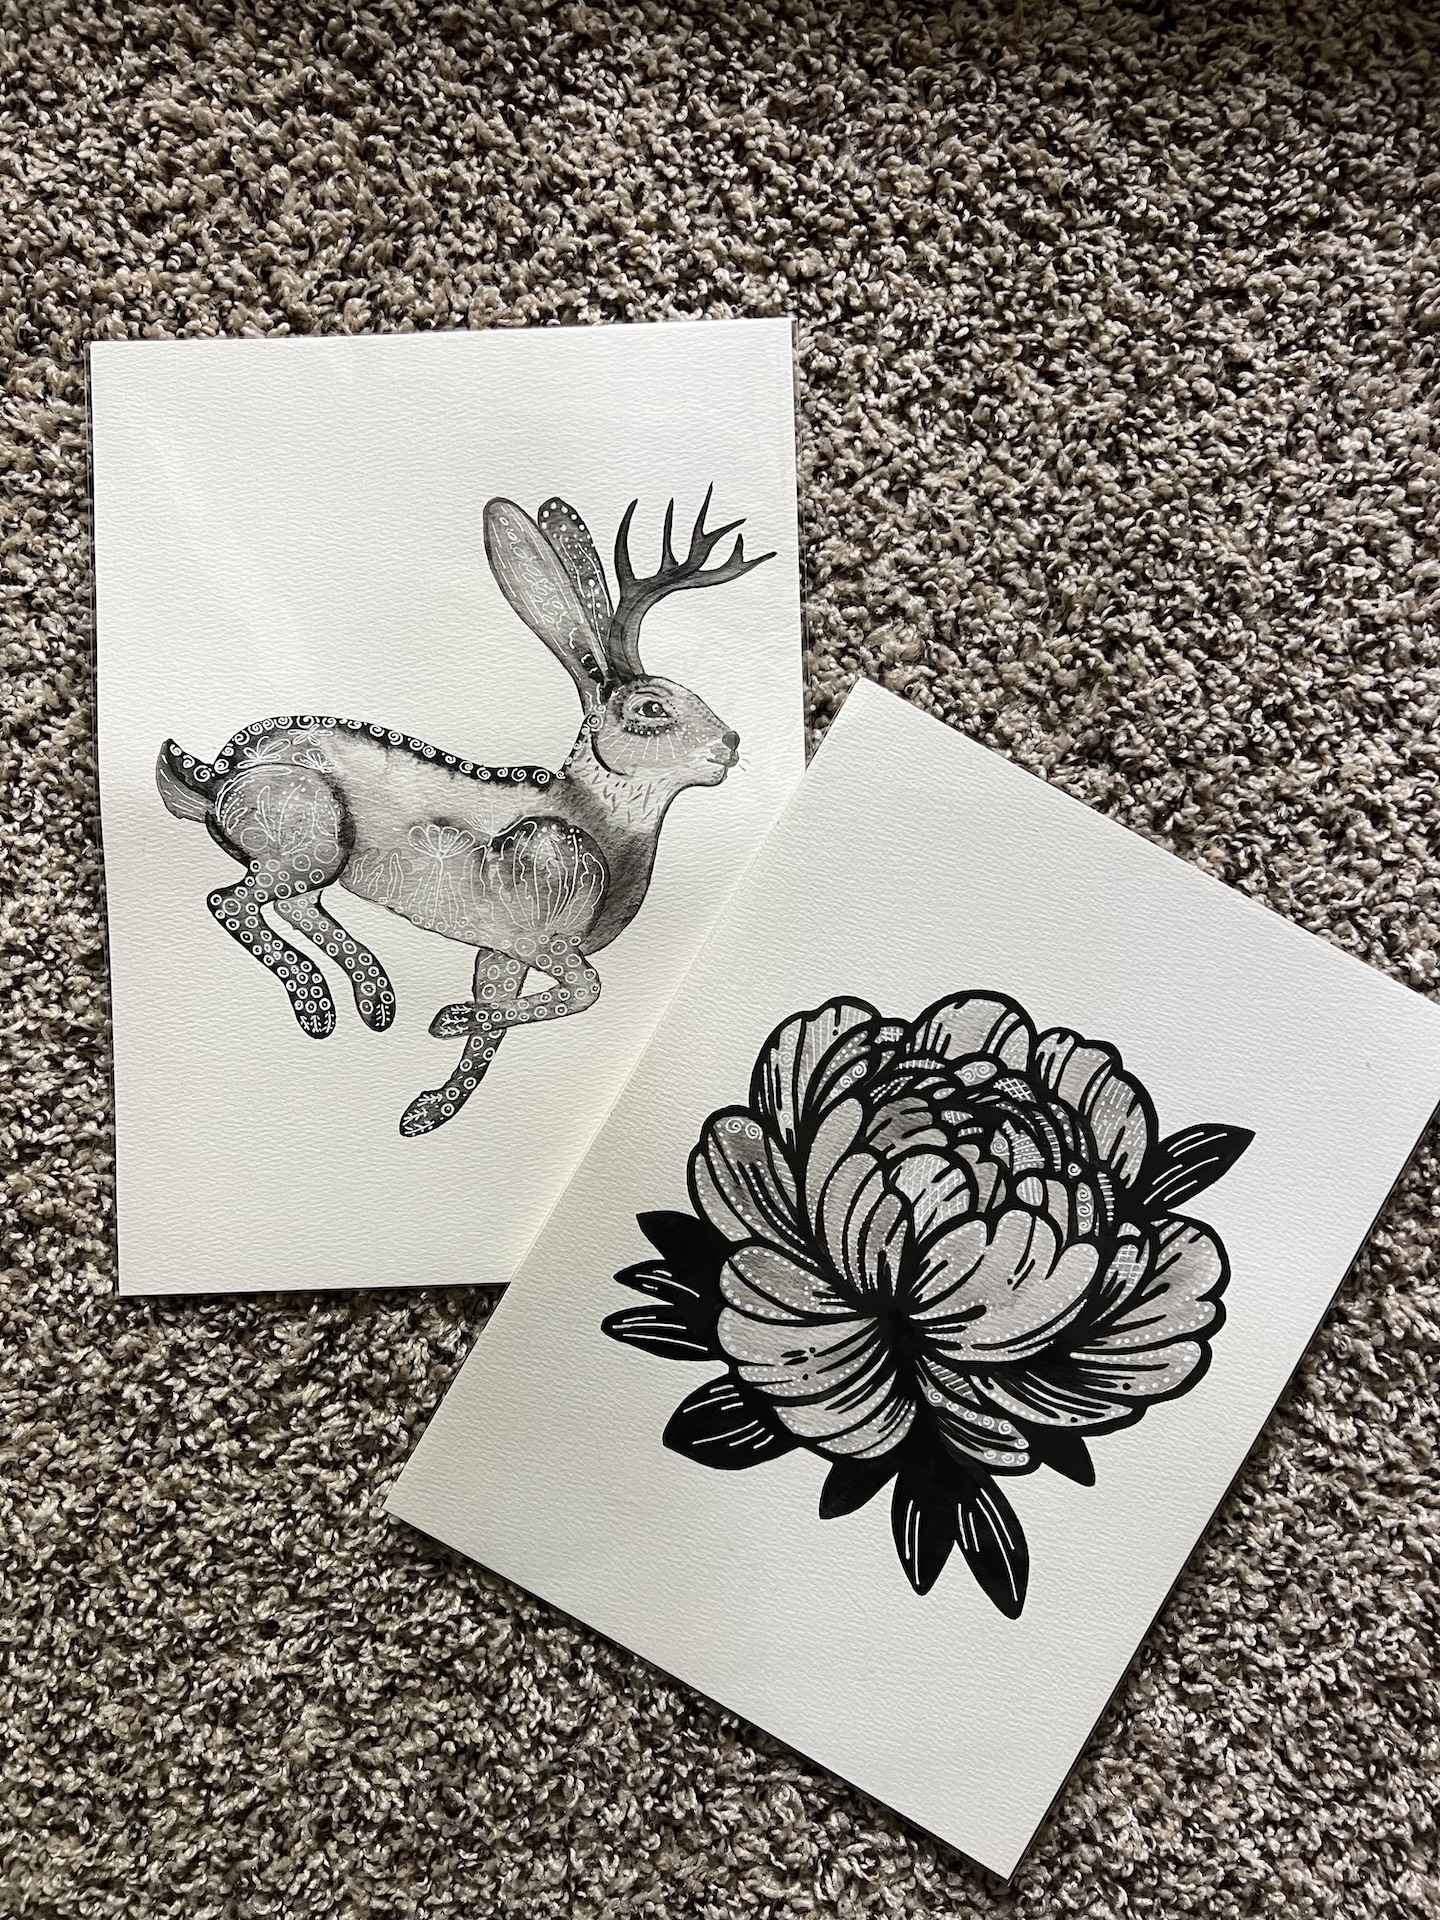 Jackalope and Peony 

From “Black Watercolor” series. 
Size 9x12 each